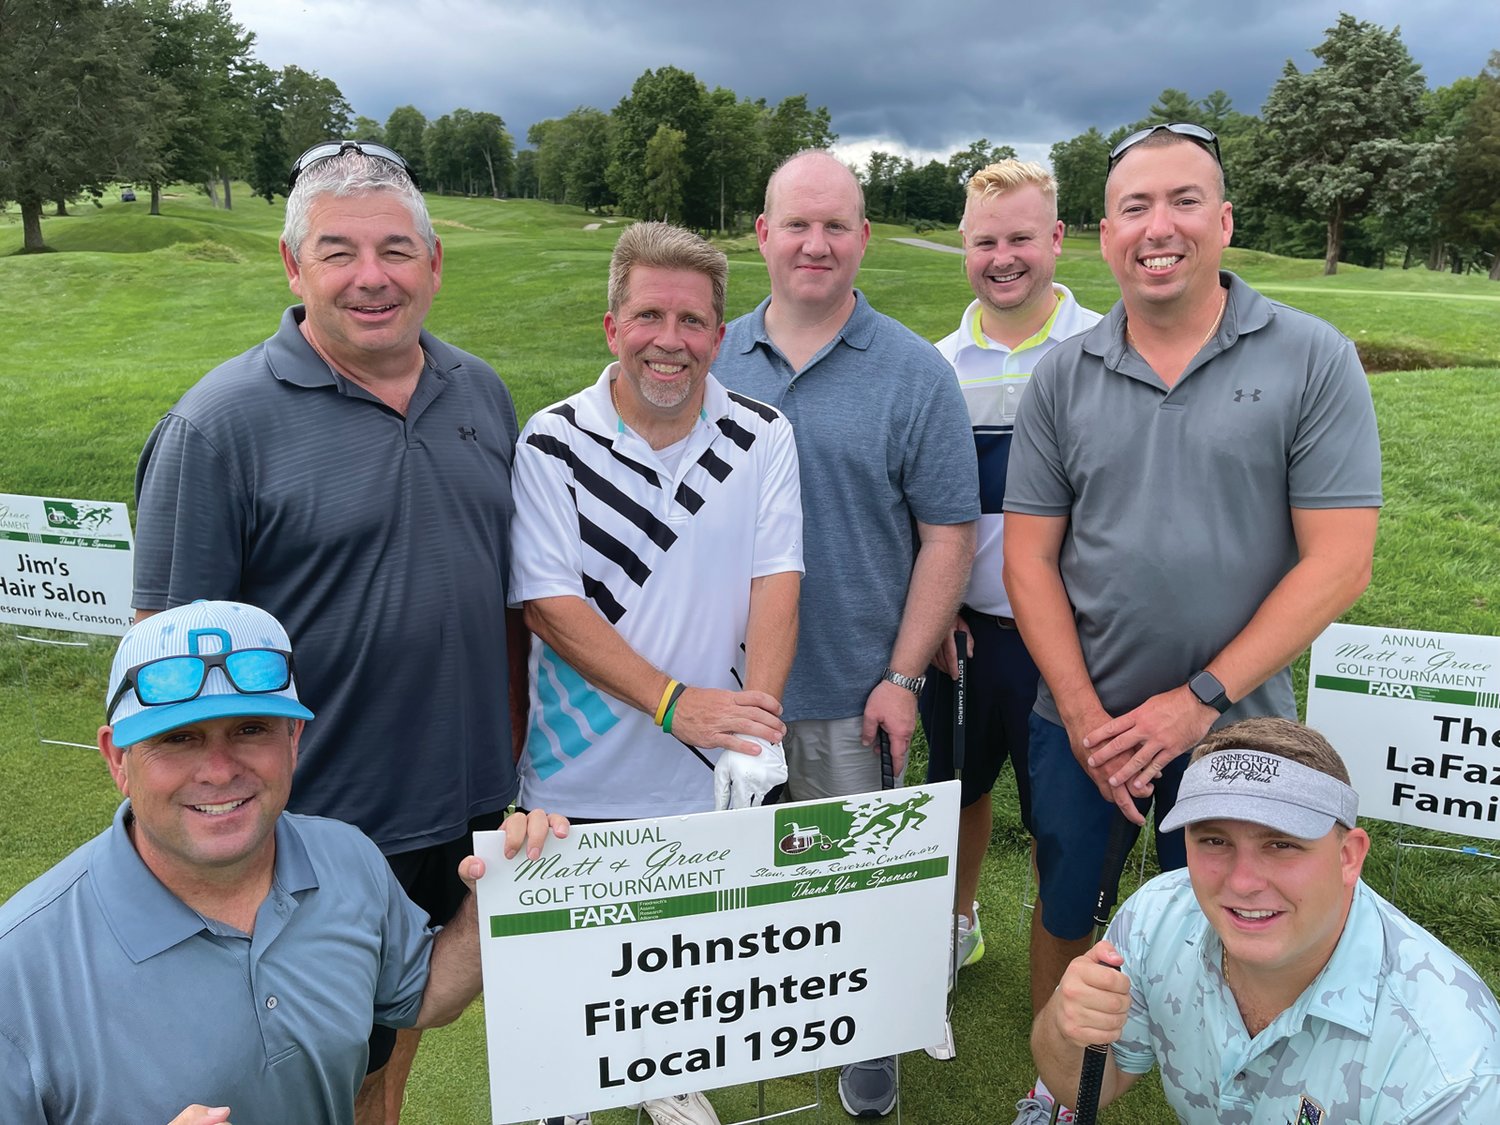 DANGEROUS DRIVERS: From left to right, David Pingitore, David Iannuccilli, Richard Boehm, Keith Calci, Tom Balkun, Adam Pontbriant and Anthony Colella played to honor Matt DiIorio.